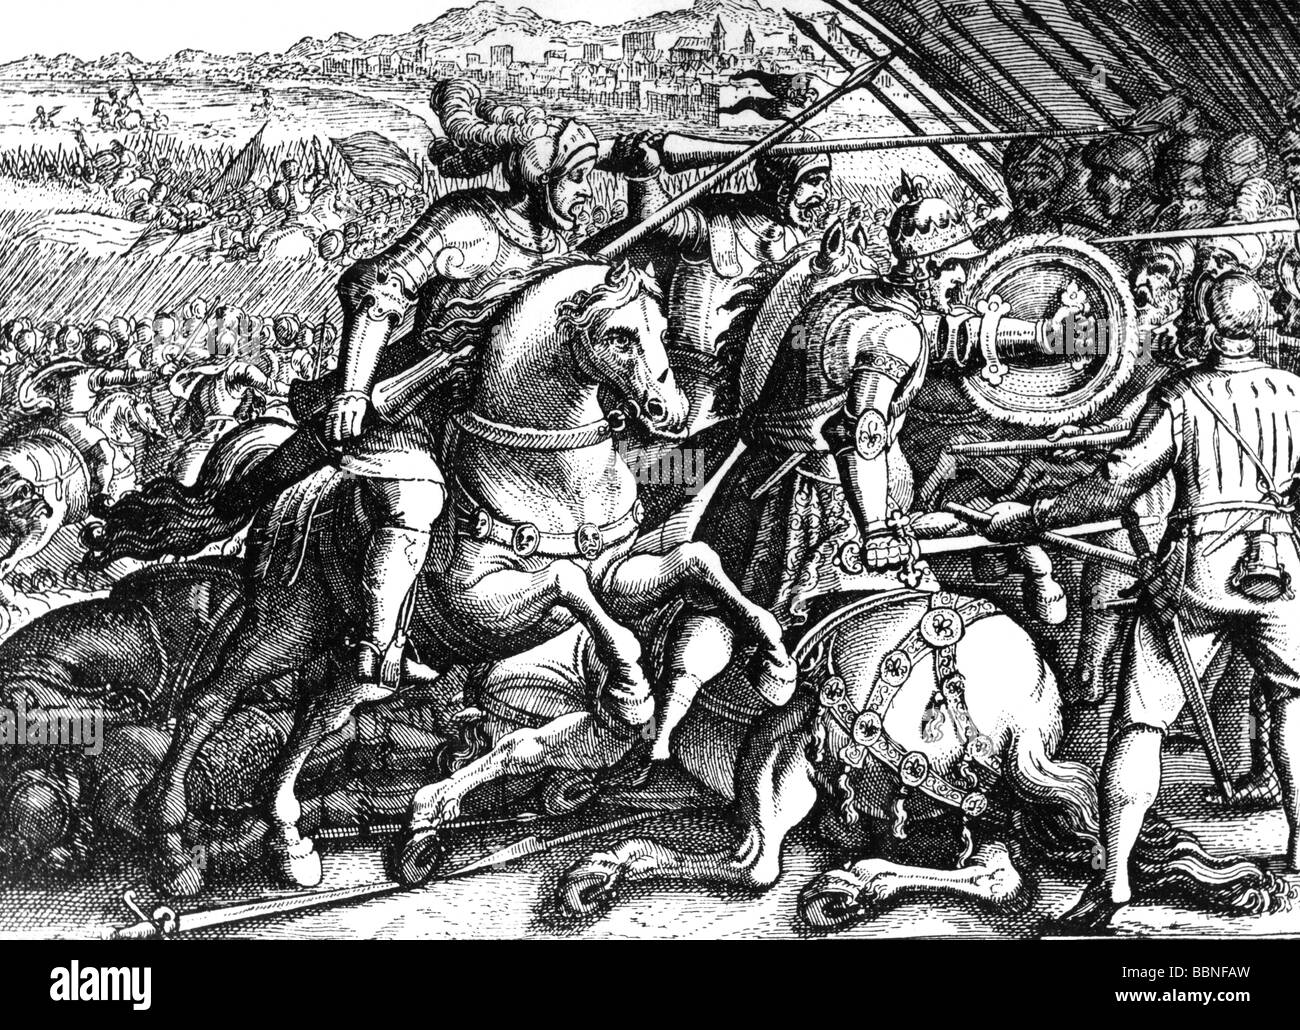 Francis I, 12.9.1494 - 31.3.1547, King of France 1.1.1515 - 31.3.1547, captured on the Battle of Pavia, 24.2.1525, copper engraving by Matthaeus Marian, 17th century, , Artist's Copyright has not to be cleared Stock Photo